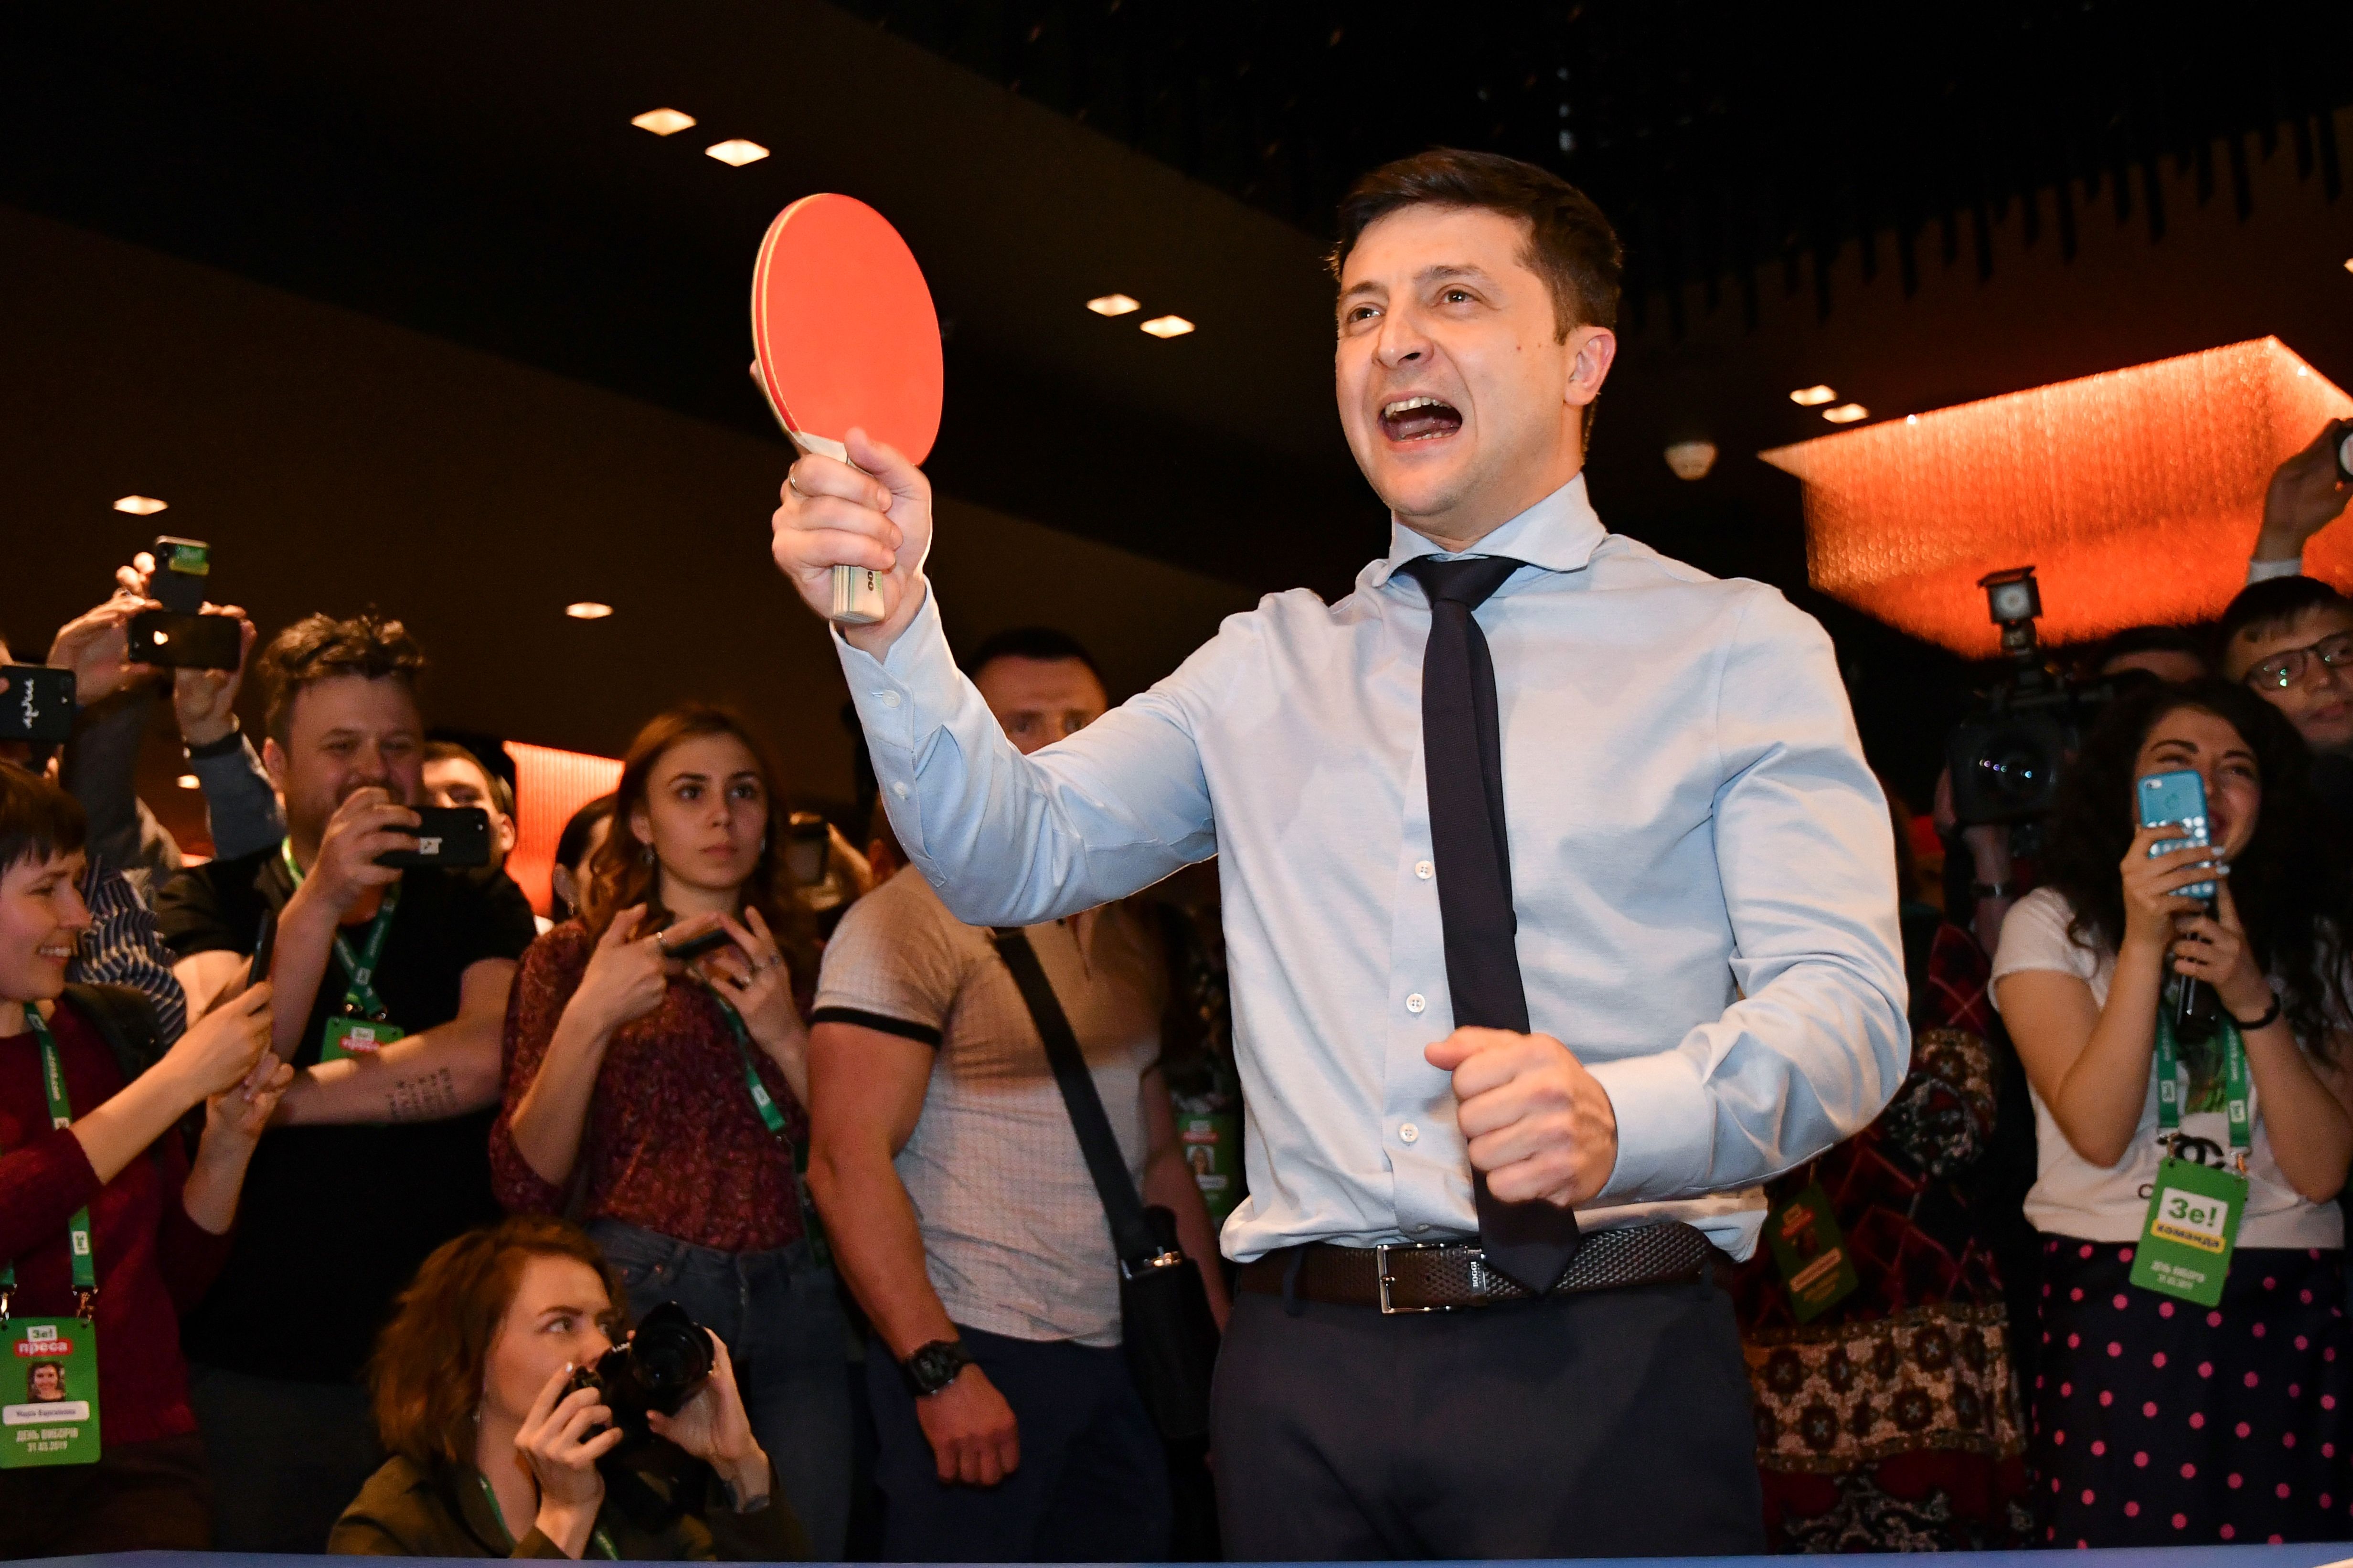 Ukrainian comic actor, showman and presidential frontrunner Volodymyr Zelensky surrounded by cameramen and photographers plays table tennis with a journalist ahead of the provisional results at the headquarter in Kiev on March 31, 2019. (GENYA SAVILOV/AFP/Getty Images)